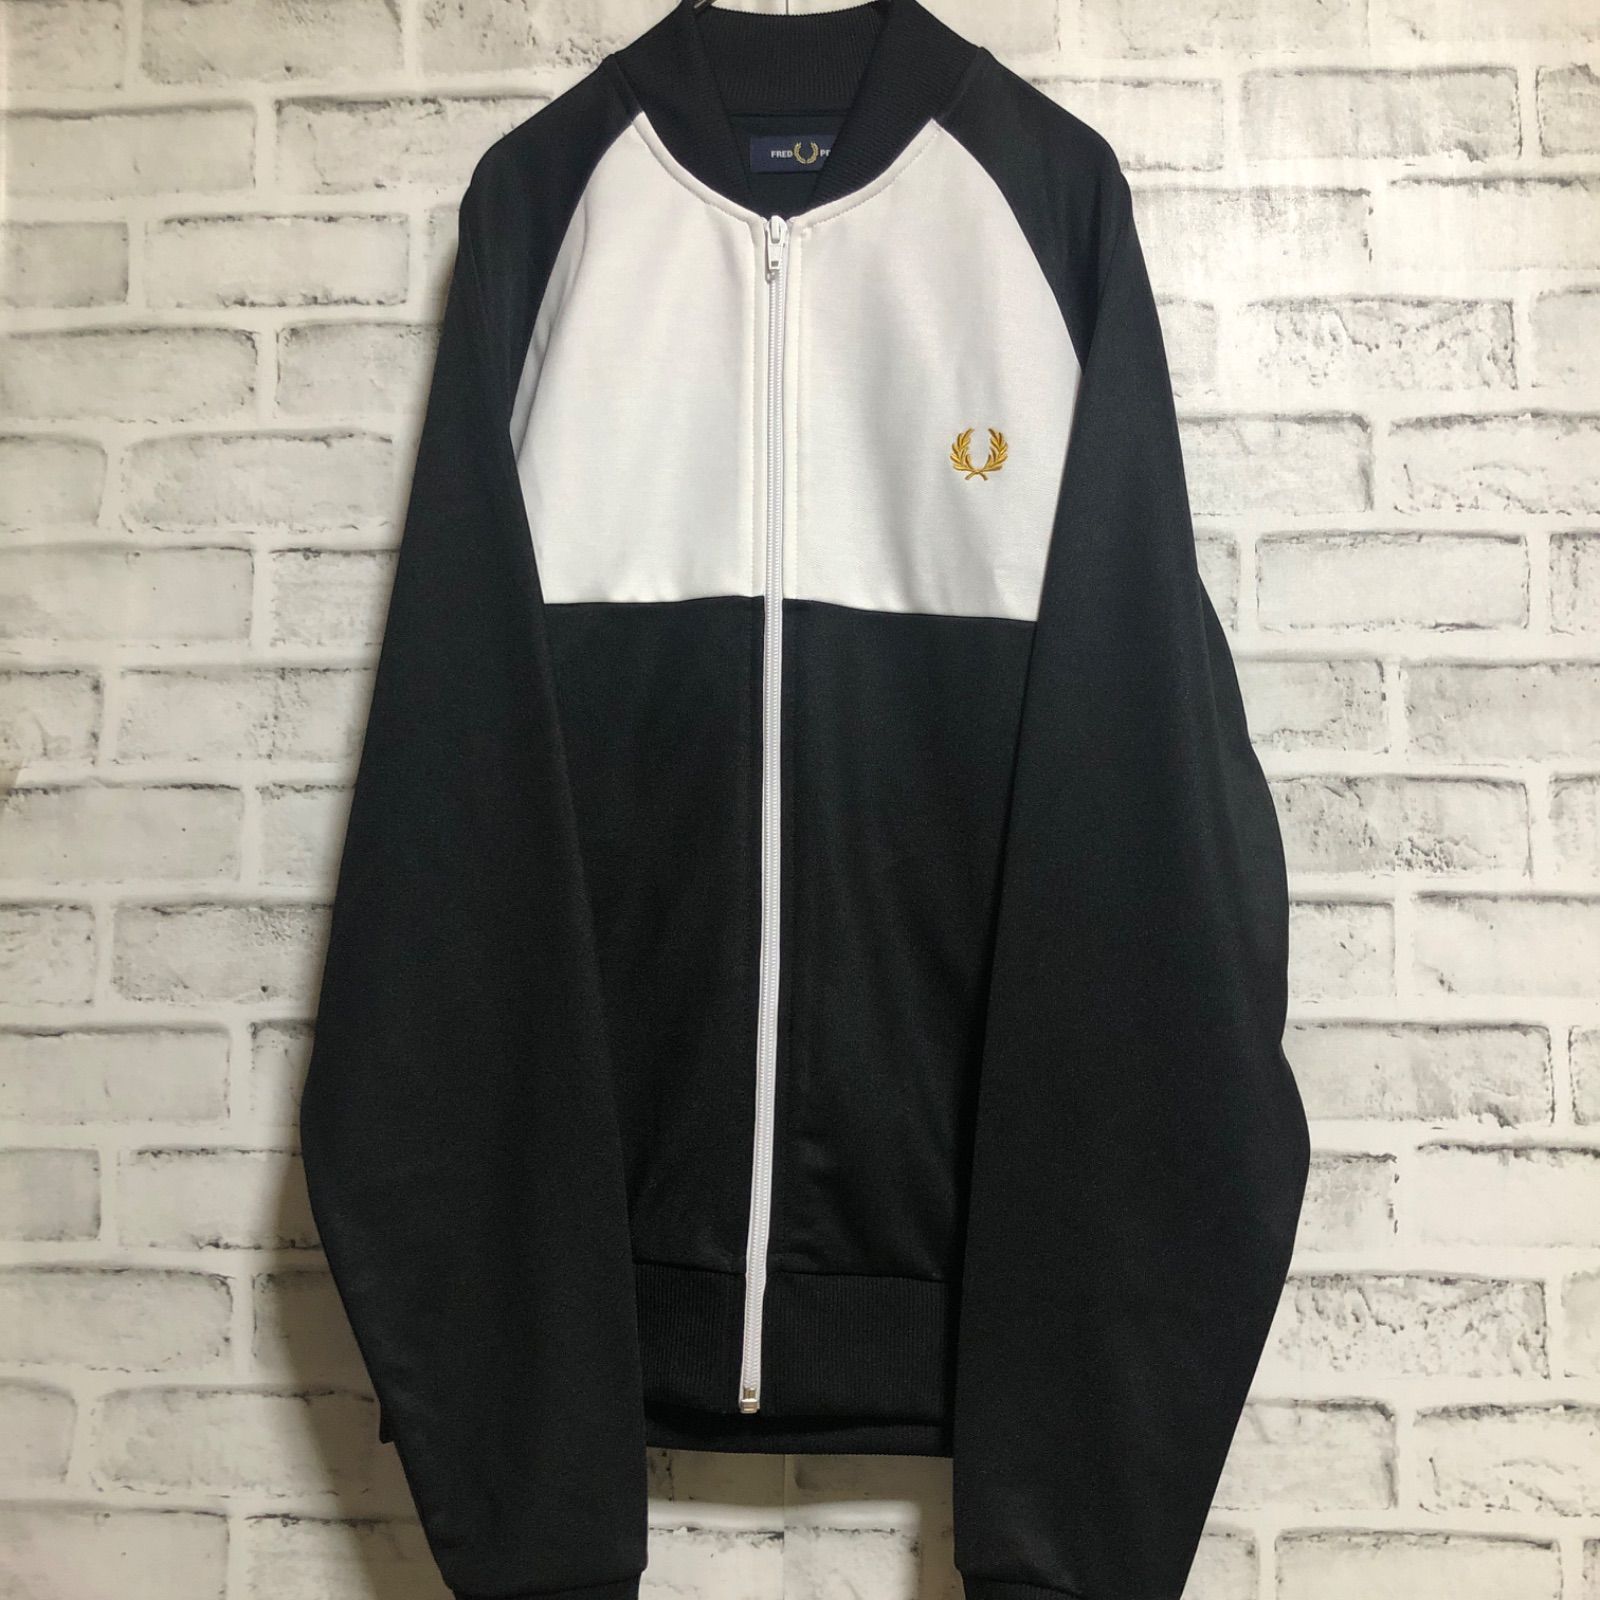 FRED PERRY 希少ジャージ　黒　美品　※デッドストックジャージ